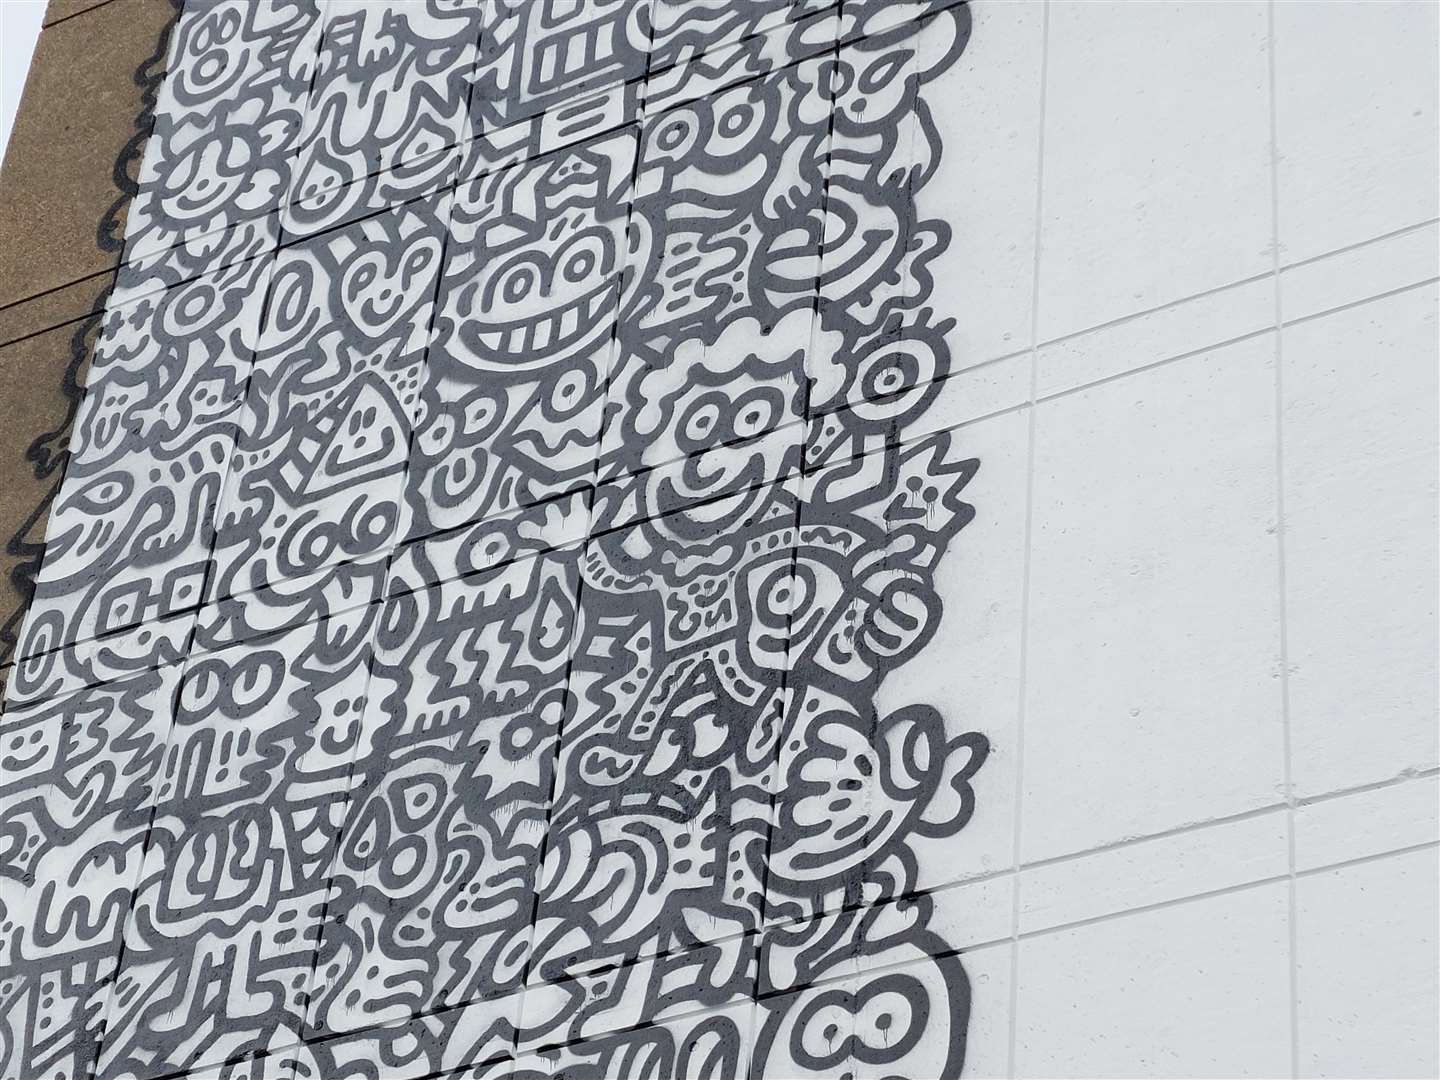 Mr Doodle features within the mural as well as his evil twin and 'doodle dog'